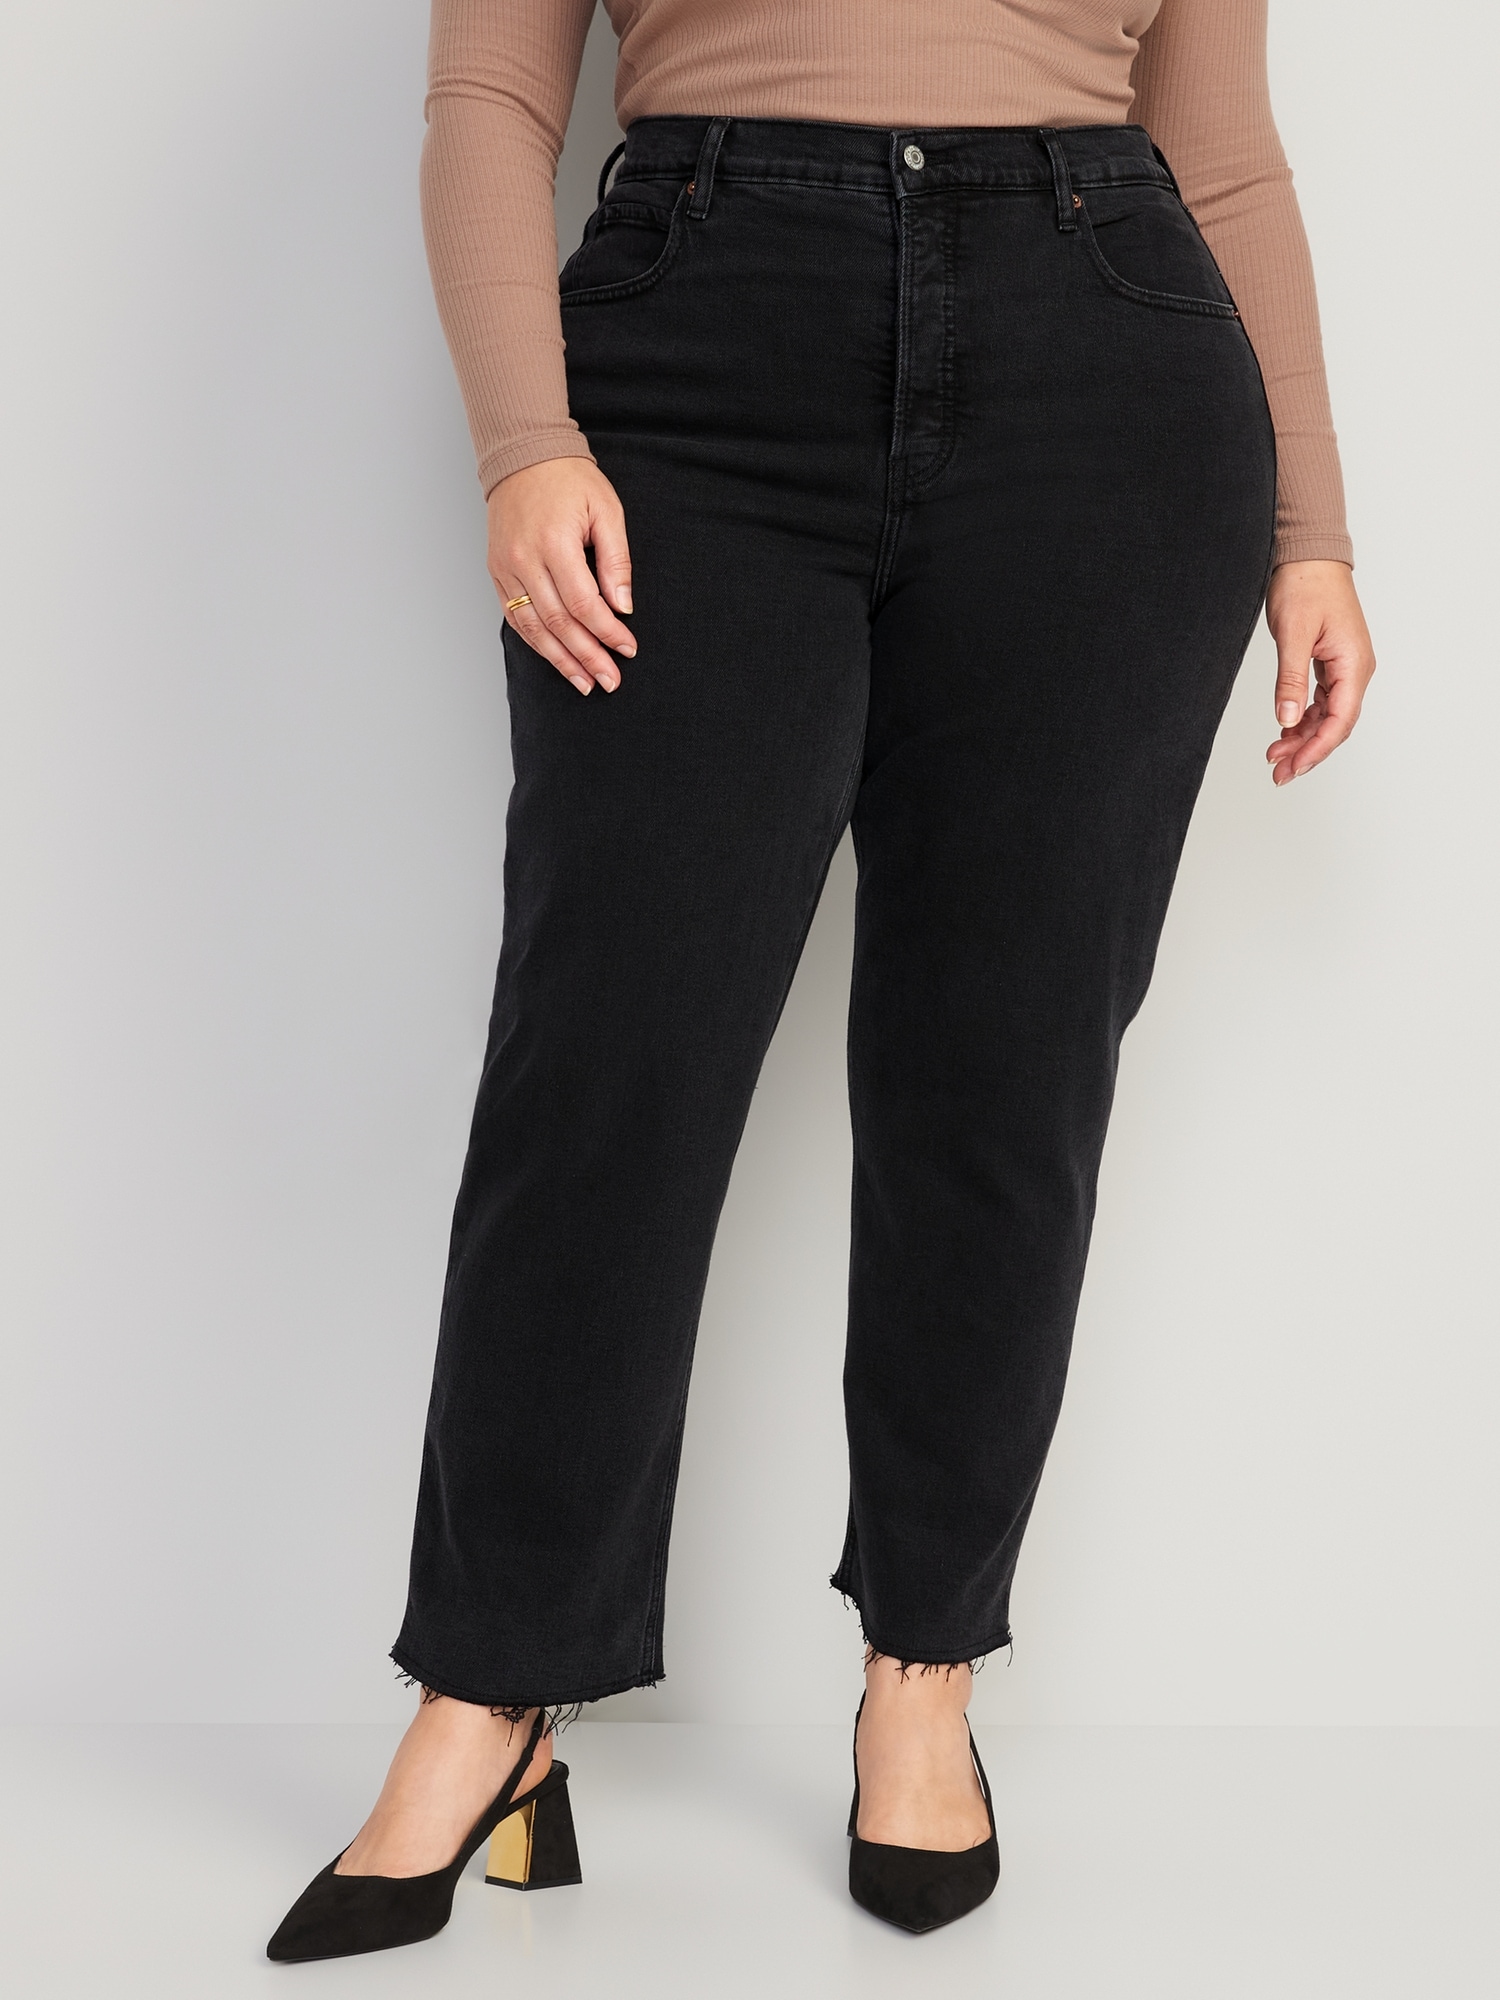 Extra High-Waisted Button-Fly Sky-Hi Straight Cut-Off Black Jeans for ...